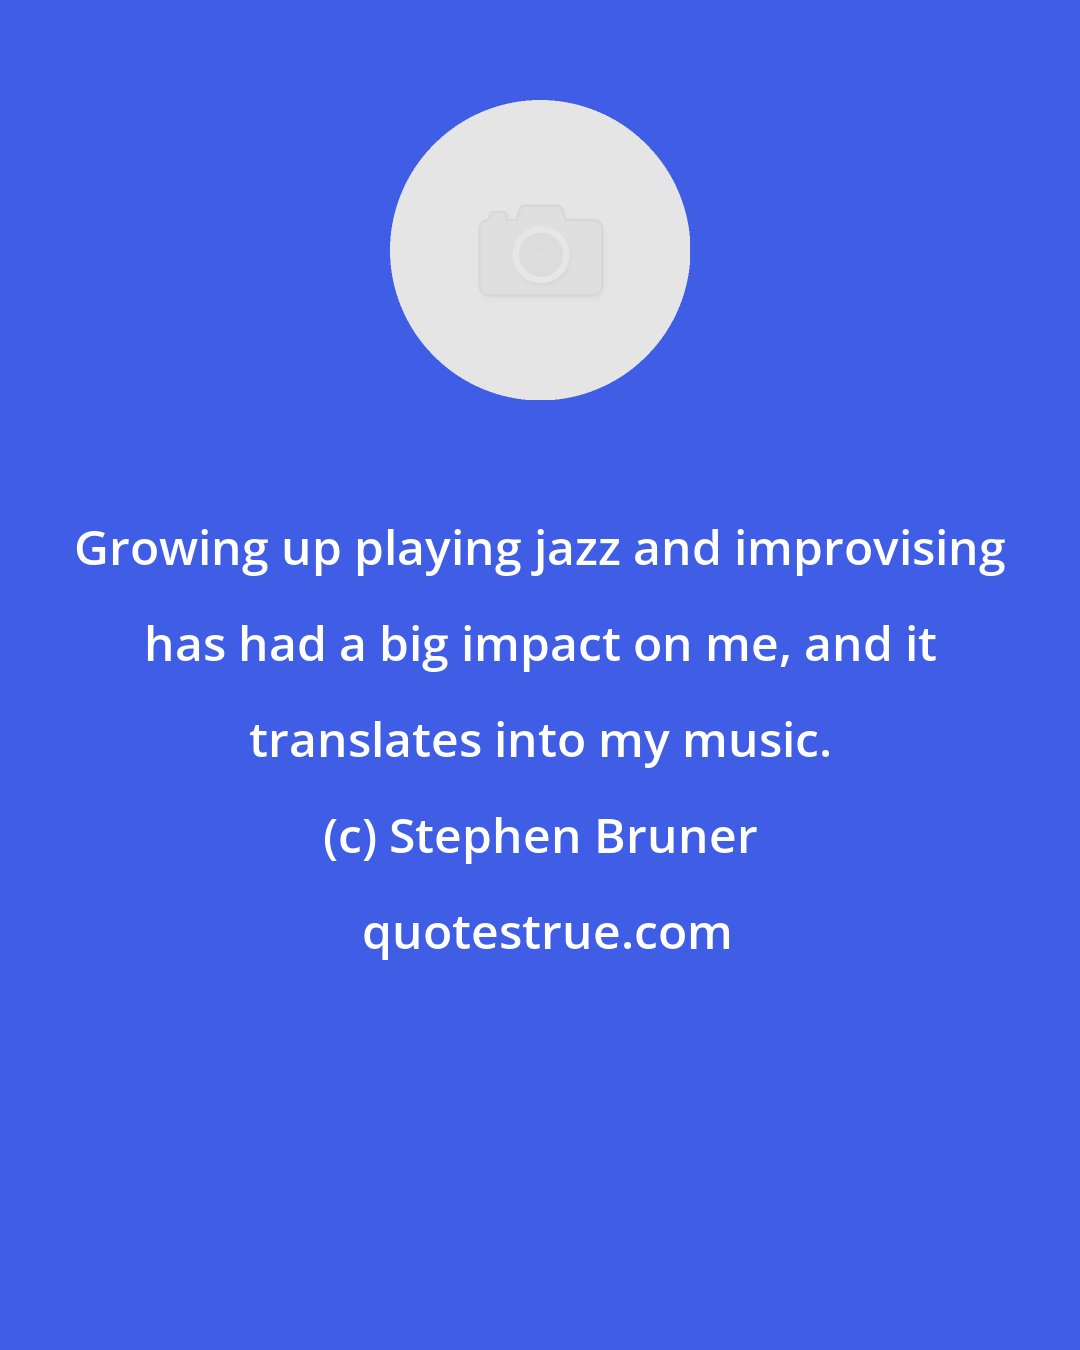 Stephen Bruner: Growing up playing jazz and improvising has had a big impact on me, and it translates into my music.